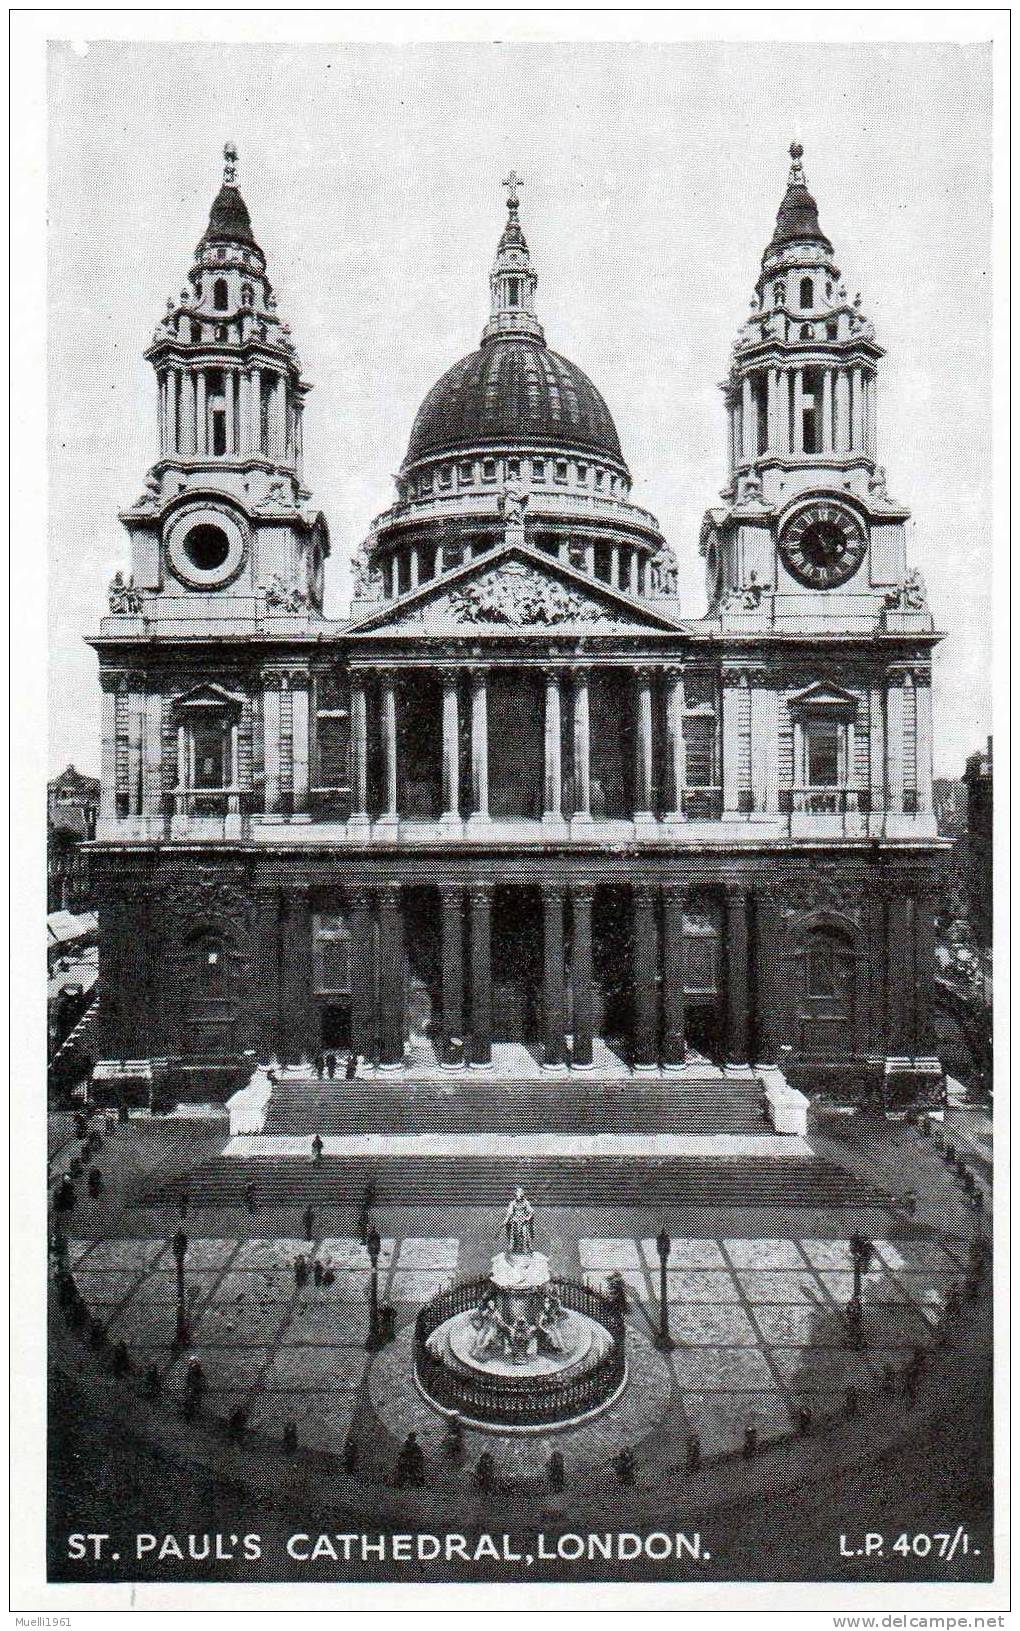 St. Pauls Cathedrale, London, 1954 - St. Paul's Cathedral